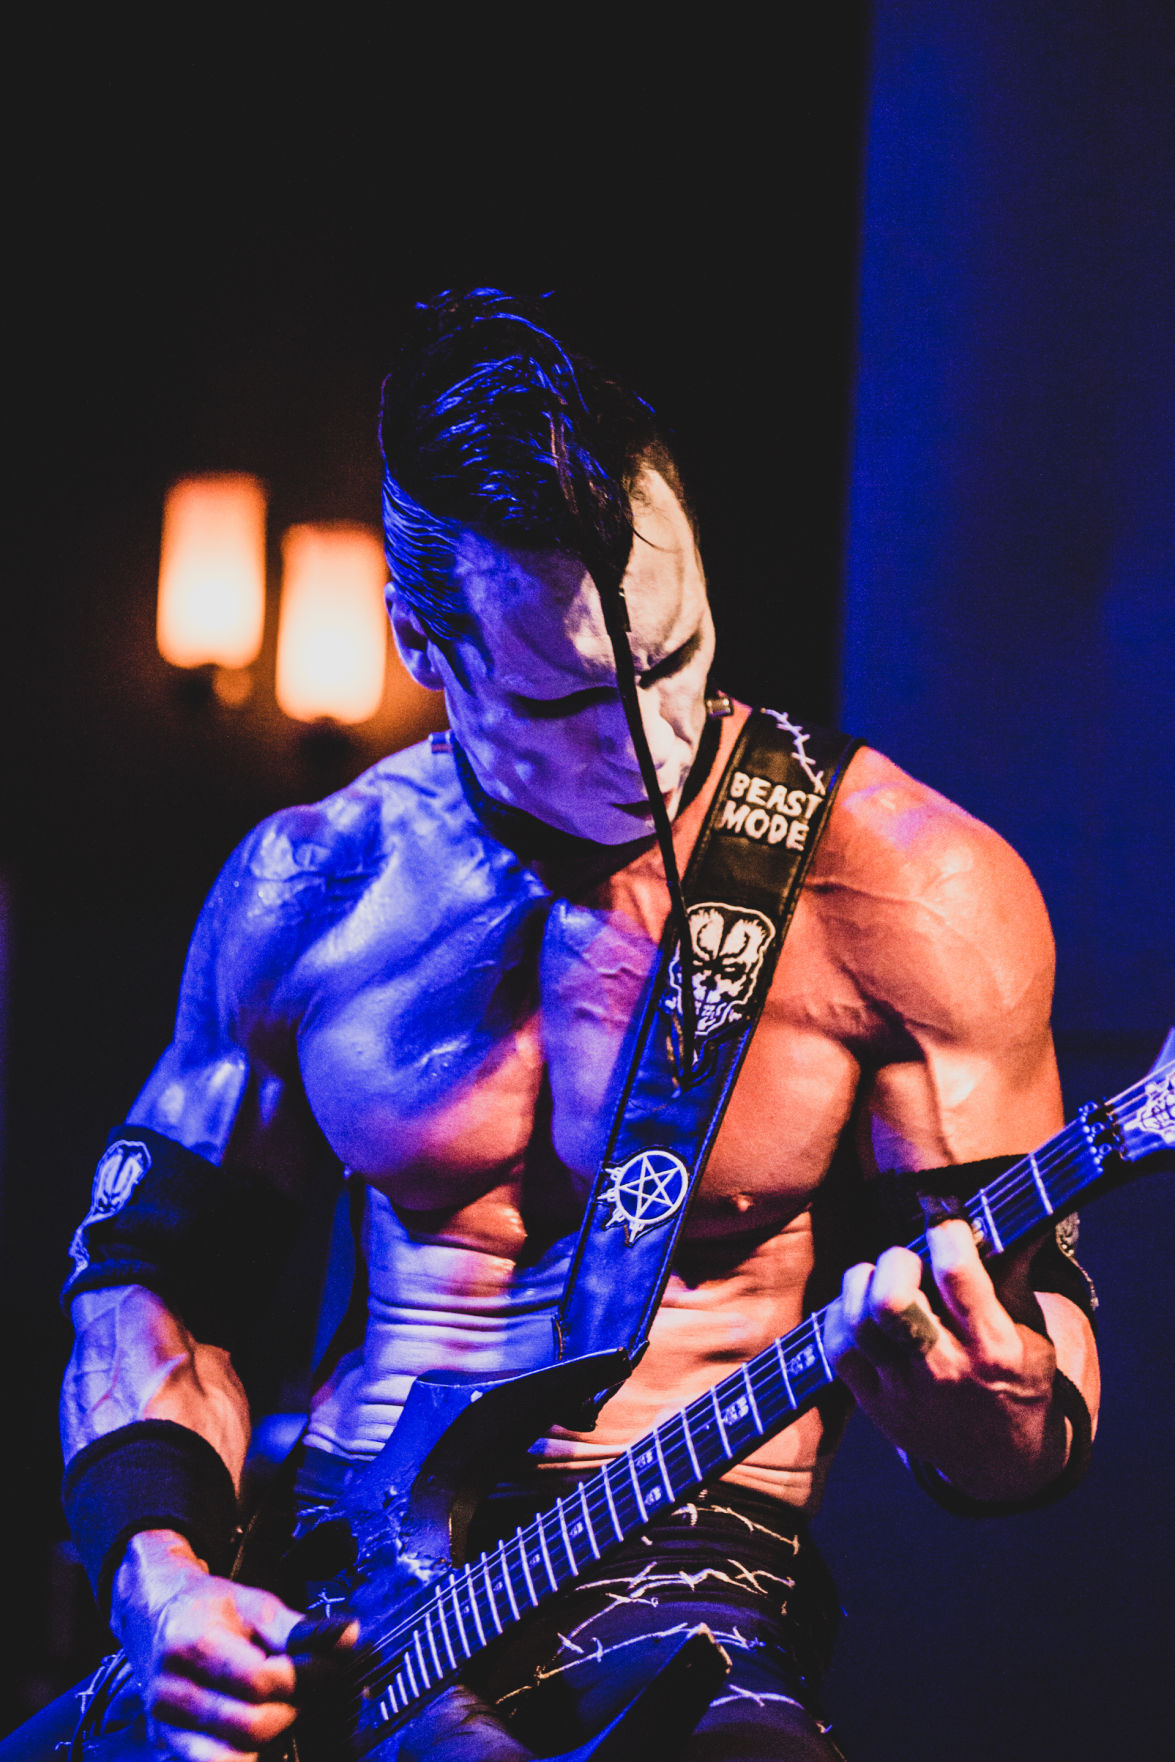 Misfits veteran Doyle turns up the wattage for some 'Abominator